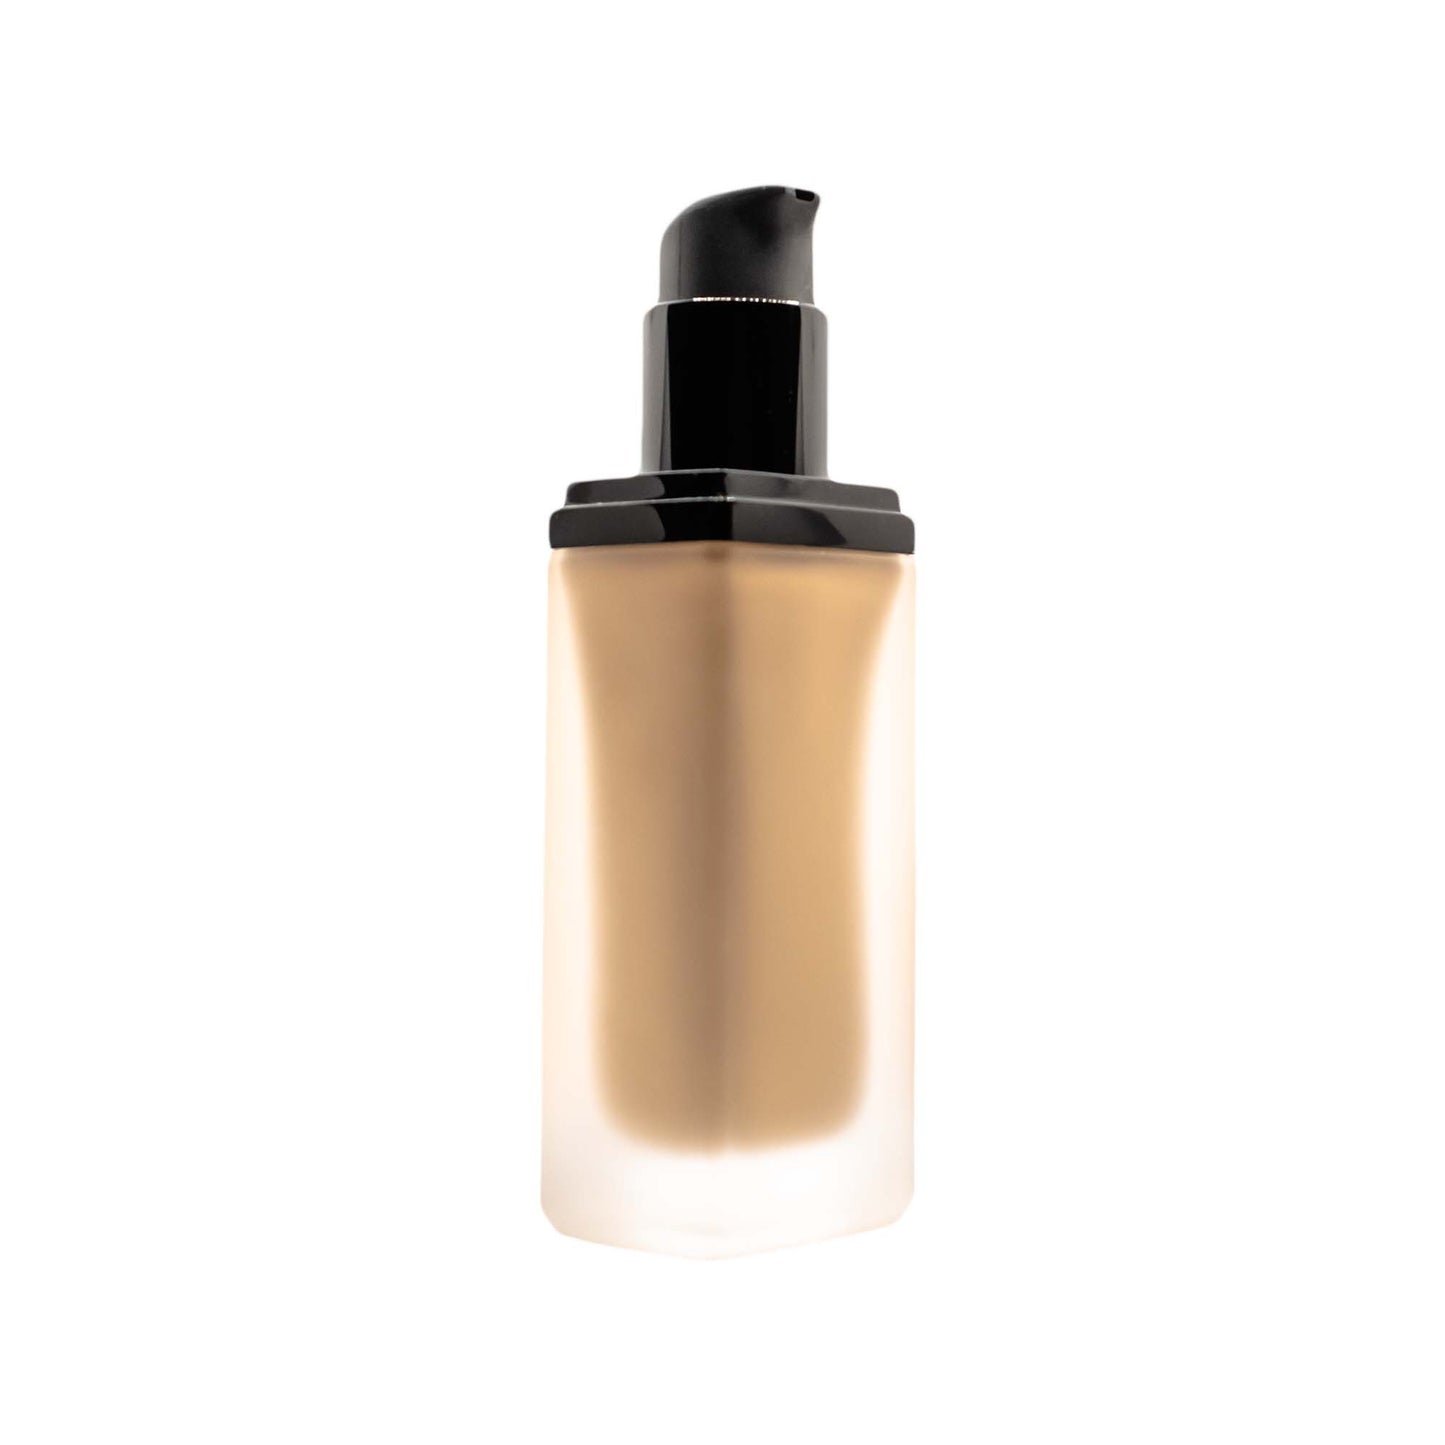 Get your glow on with Peach Foundation and SPF! Breathable coverage and SPF 15 protection. Natural finish, buildable coverage, lightweight, and perfect for all skin types.